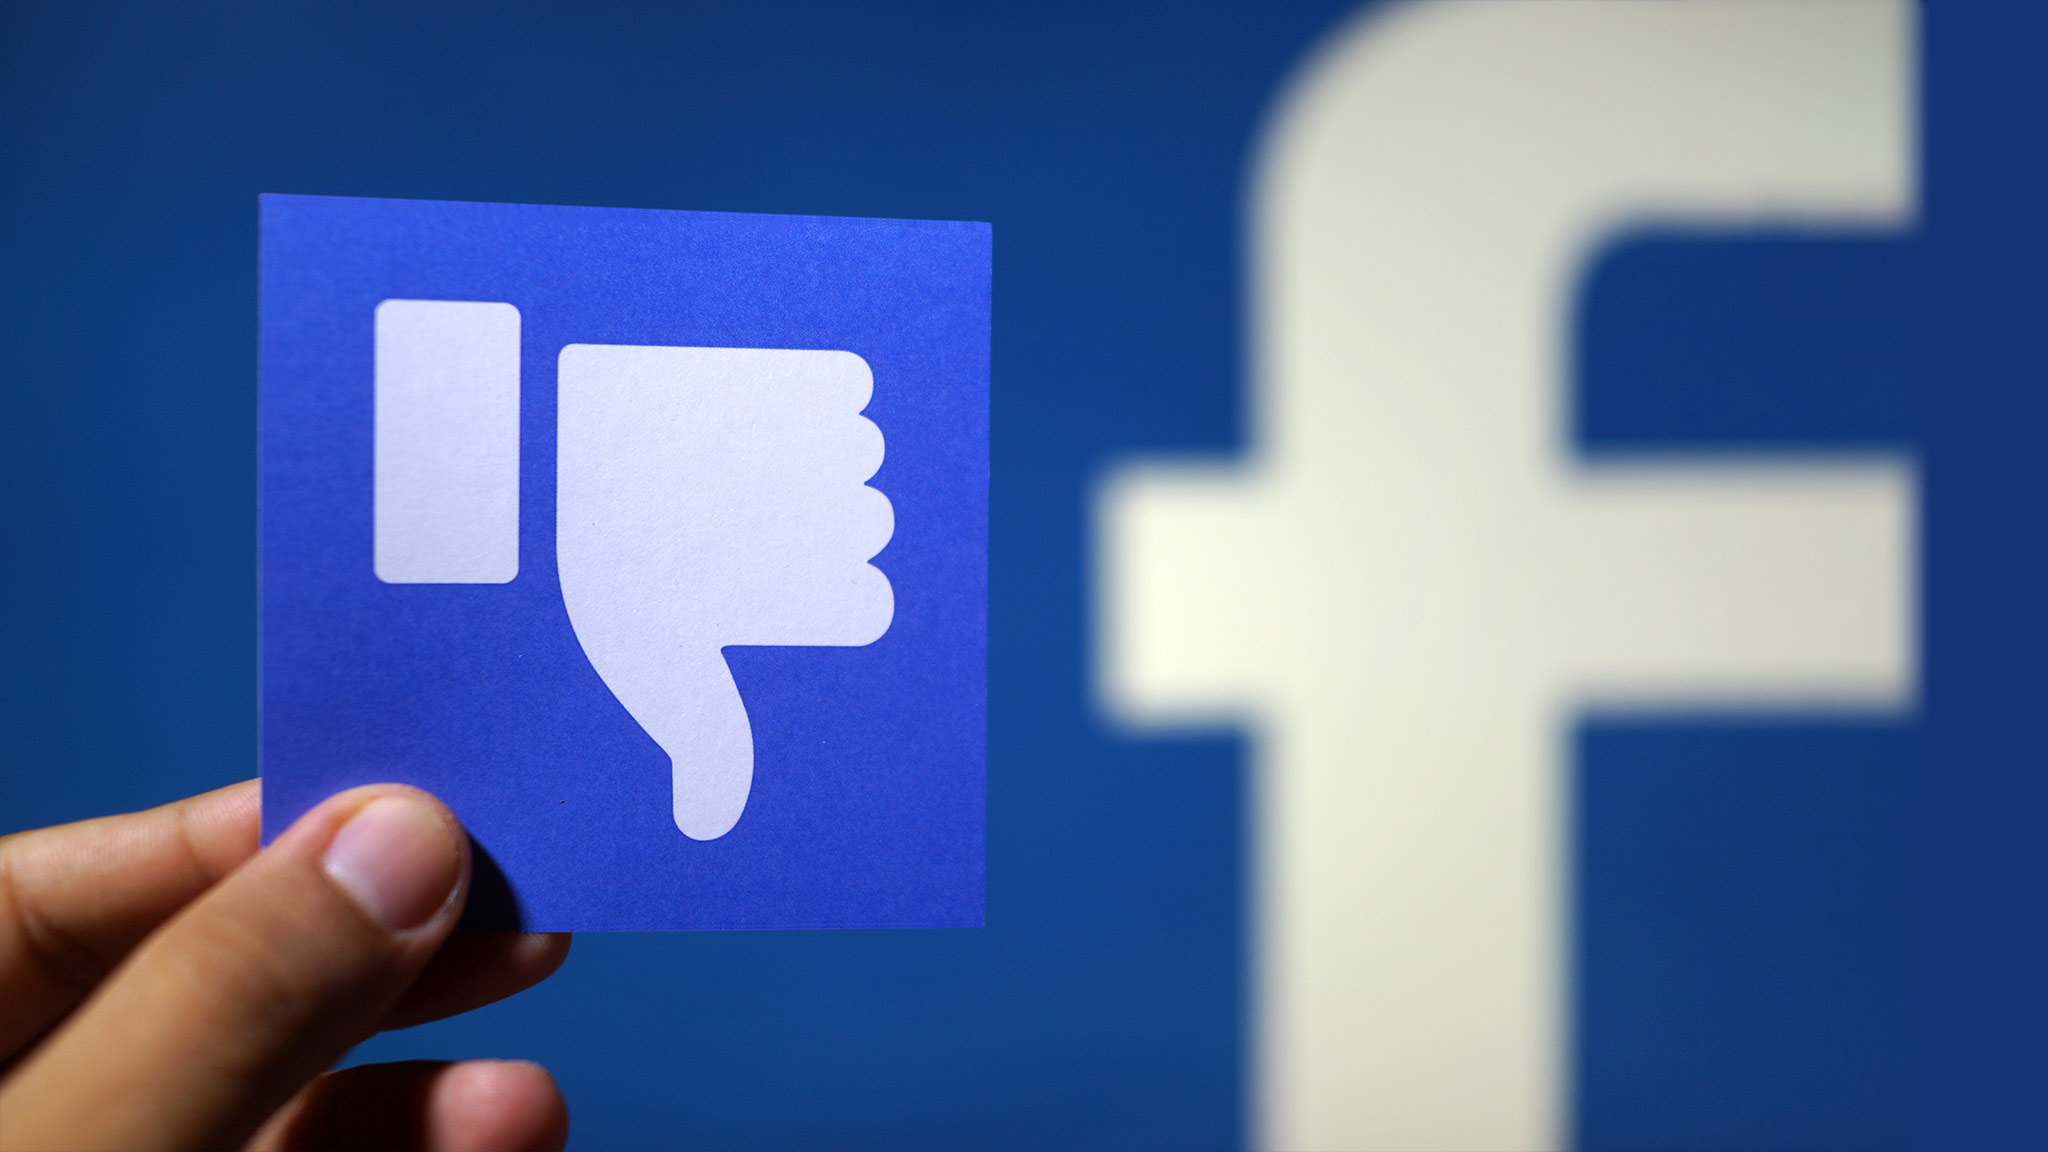 Photograph Of Hand Holding Small Card With "Thumbs Down" Sign With Part Of Facebook's Logo Blurred In The Background